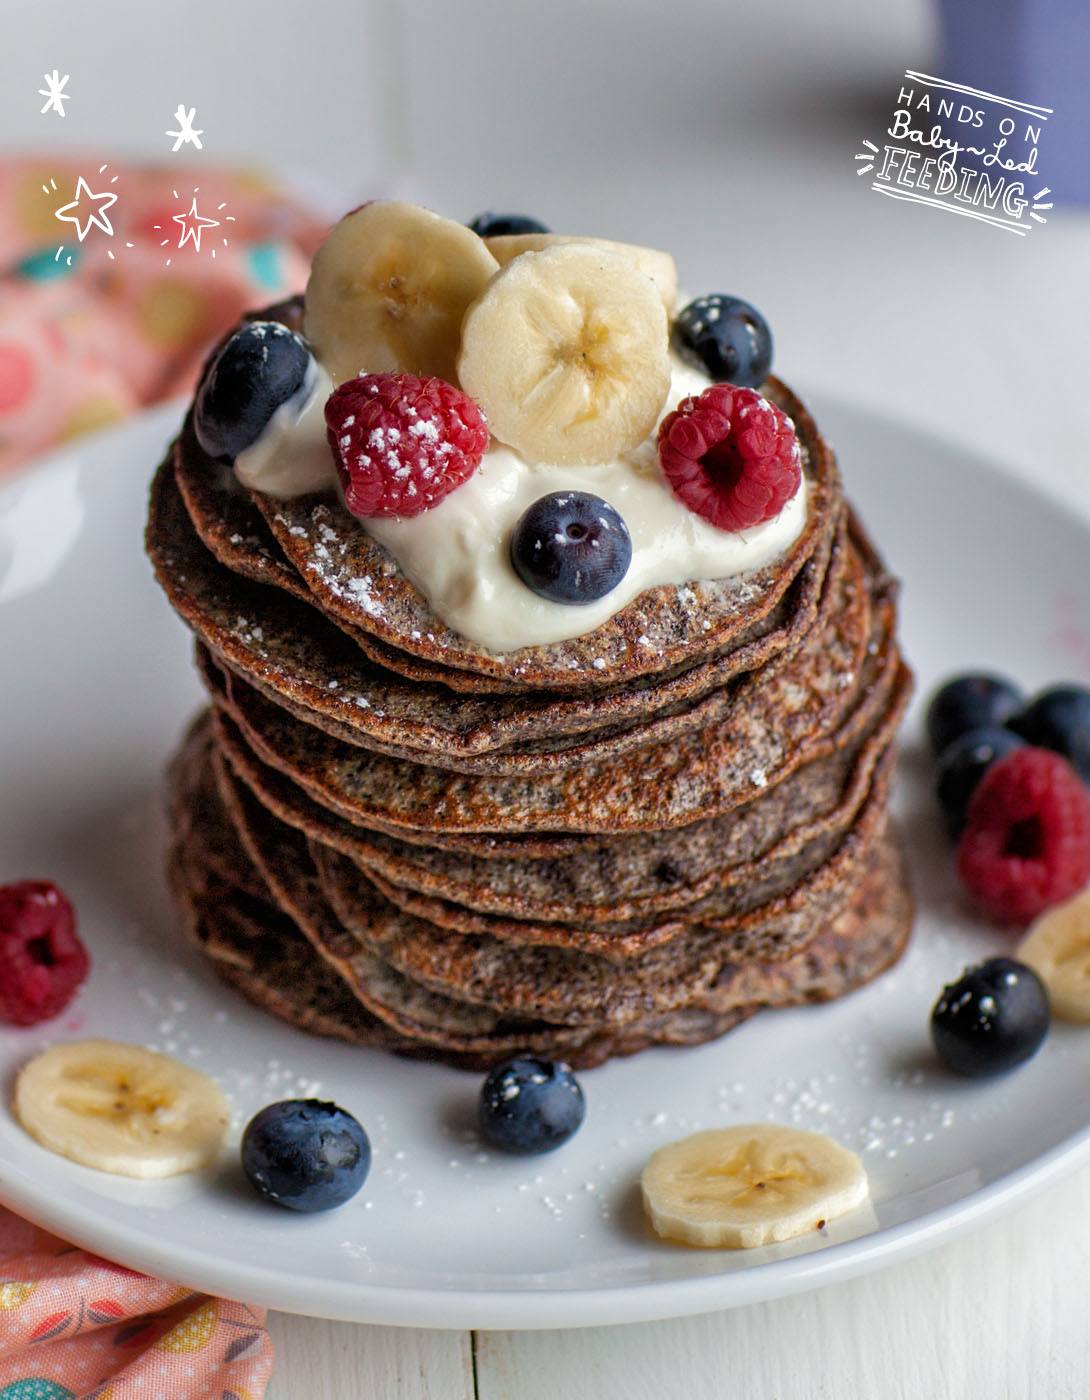 Baby Led Feeding Flourless Pancakes. Quinoa Flourless Pancakes Zoomed in image. Aileen Cox Blundell Homemade Healthy baby breakfast. 